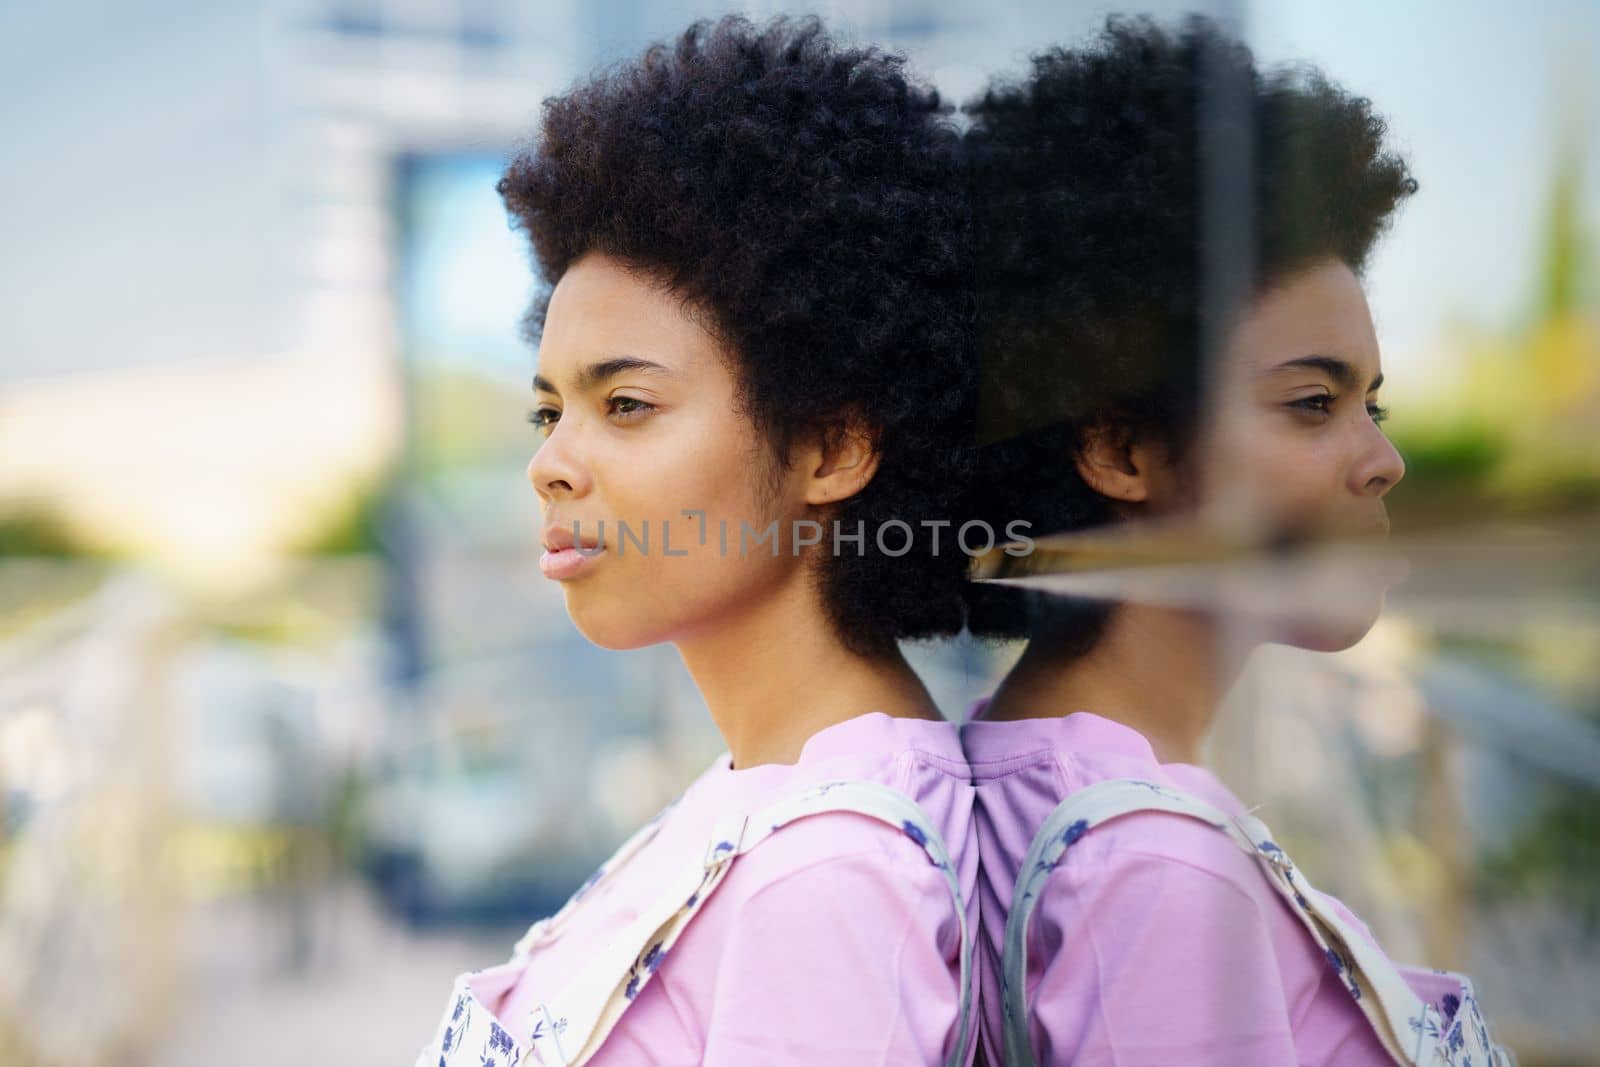 Side view of serious African American female with Afro hairstyle standing near glass house on street against blurred background in city